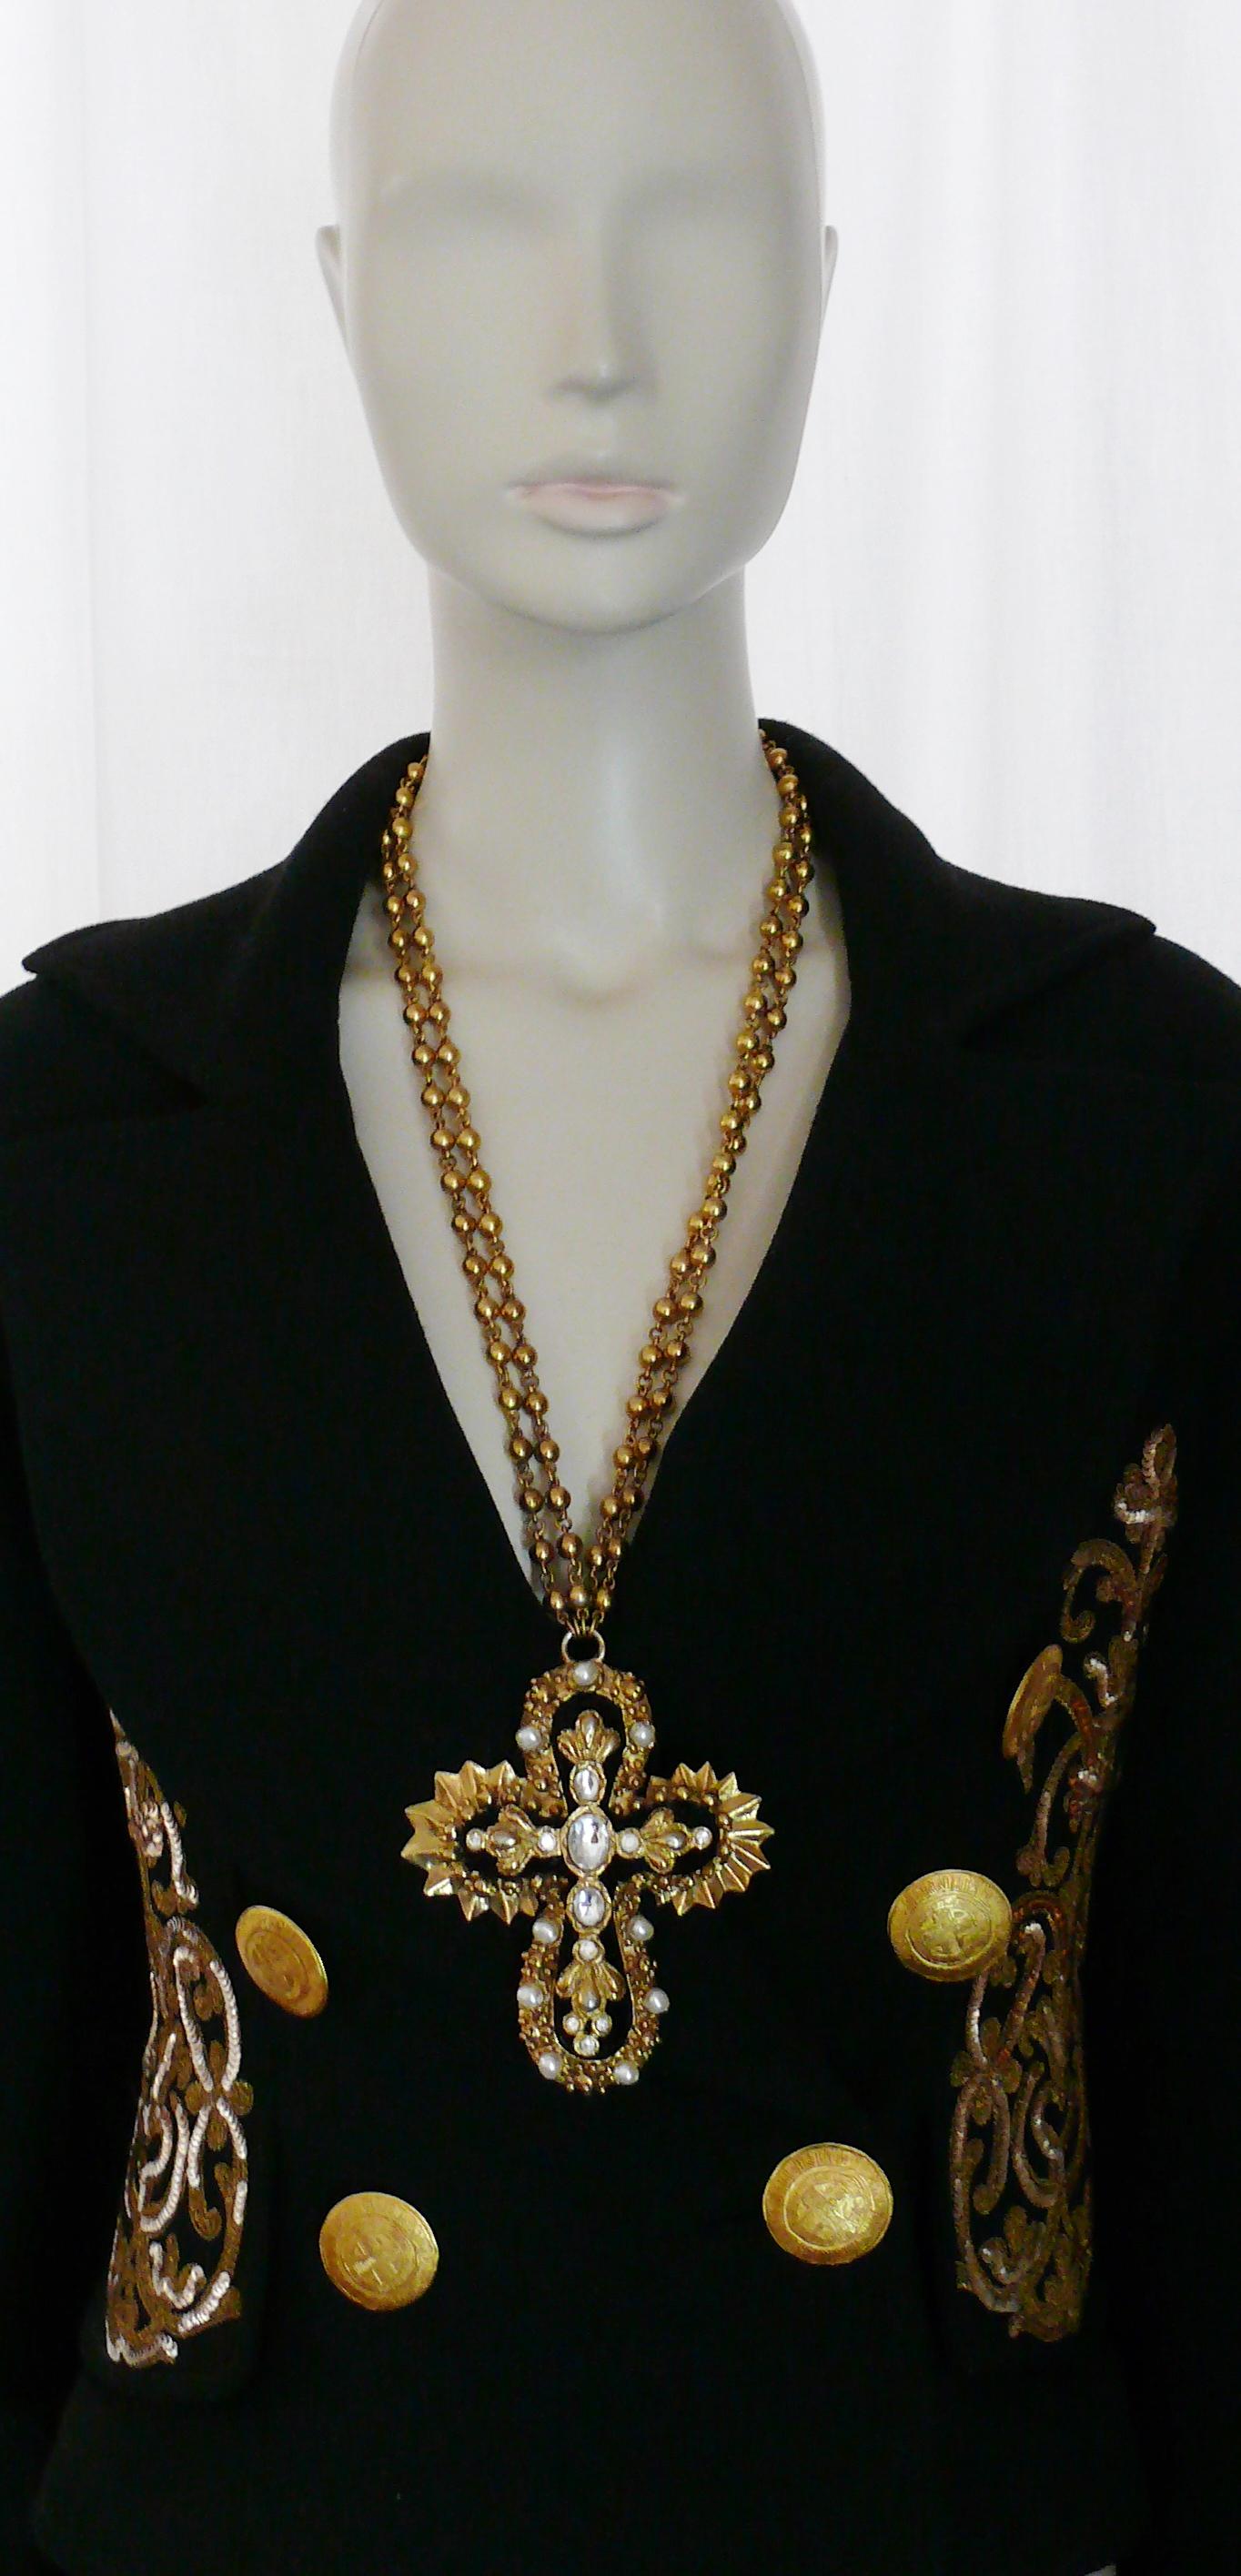 CHRISTIAN LACROIX vintage massive iconic pendant necklace featuring a gold toned and black velvet Baroque cross embellished with faux pearls and clear crystals.

Double gold toned ball chain
Hook clasp.

Marked CHRISTIAN LACROIX CL Made in